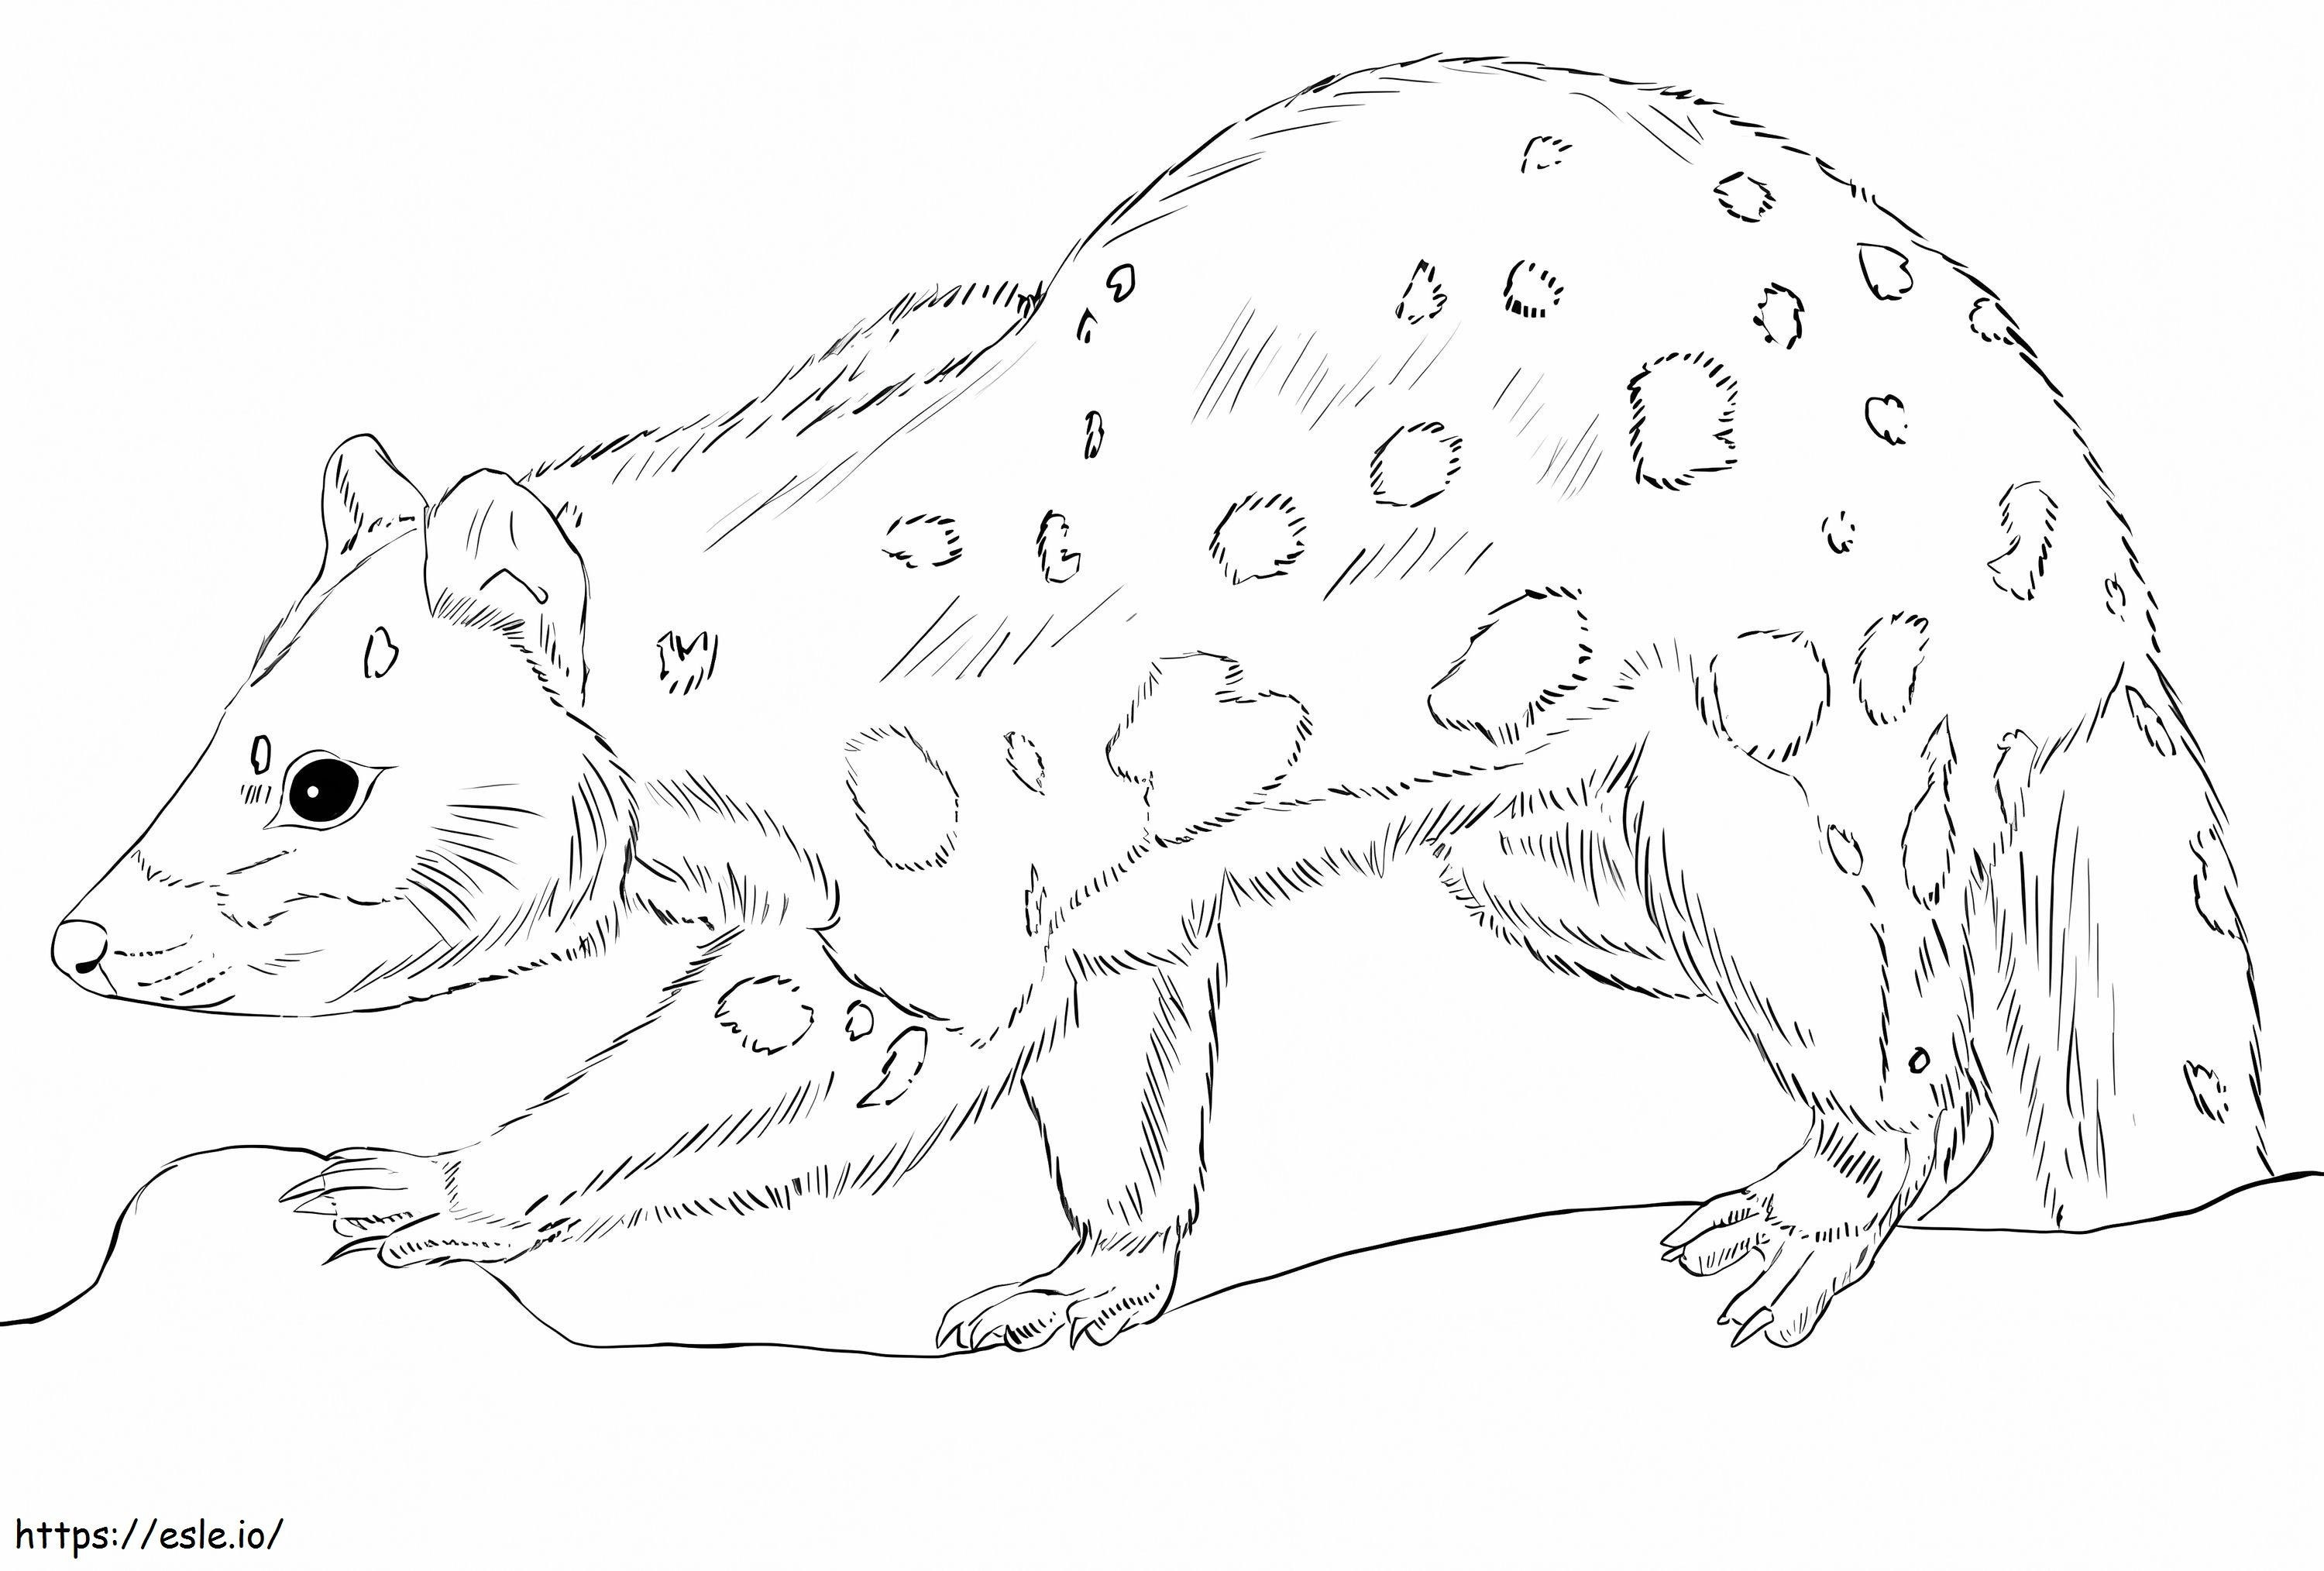 Northern Quoll 1 coloring page